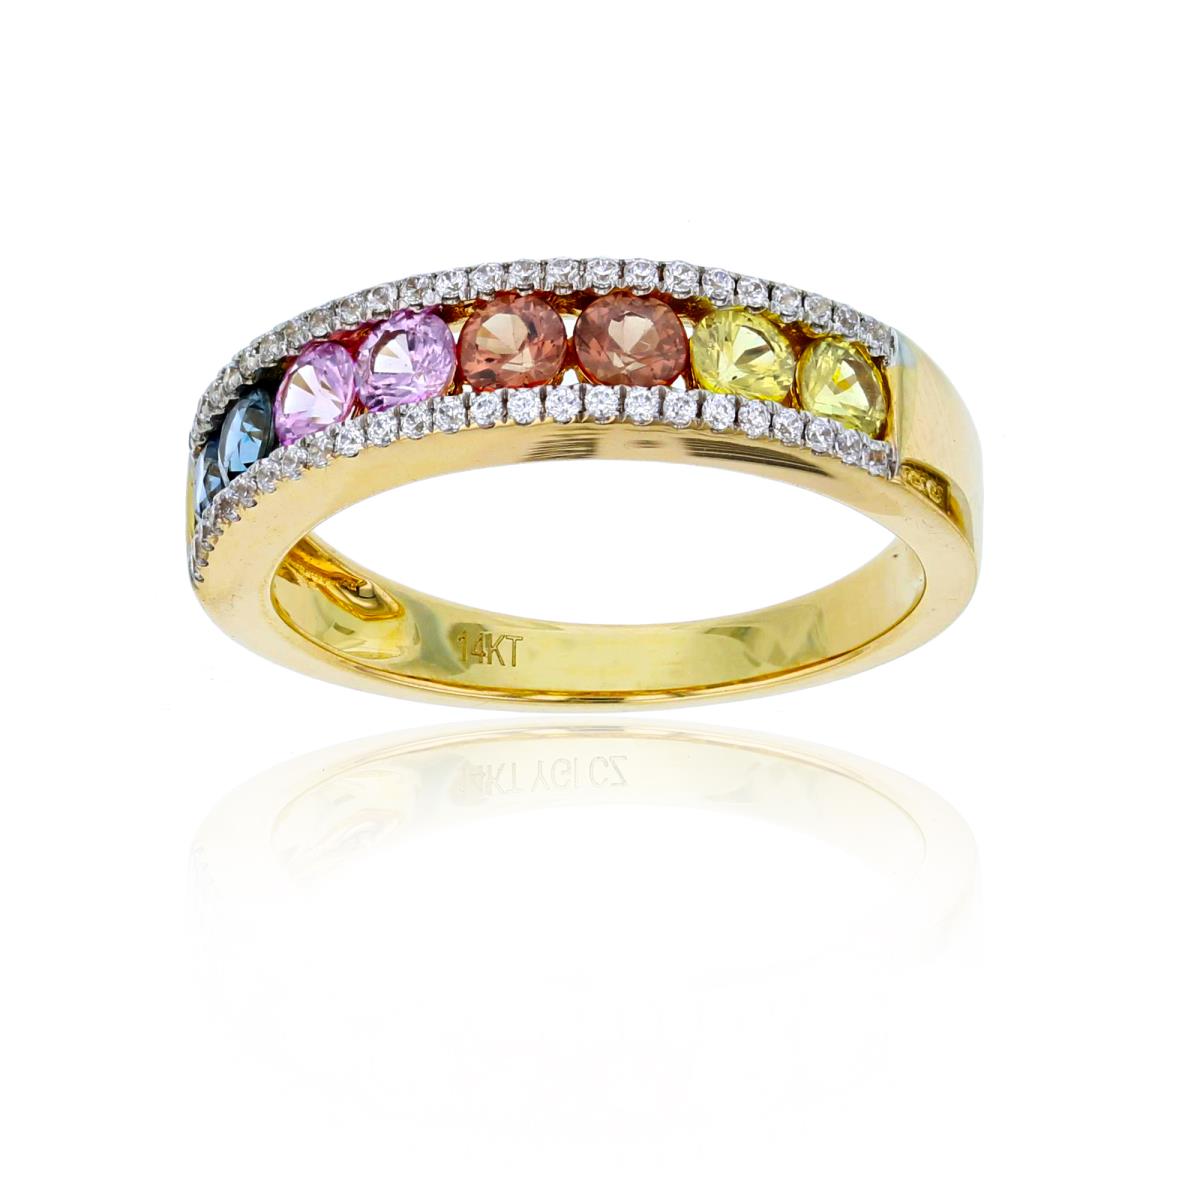 14K Yellow Gold 0.25cttw Rnd Diamonds & 3mm Rnd Multicolor Sapphire Band Ring